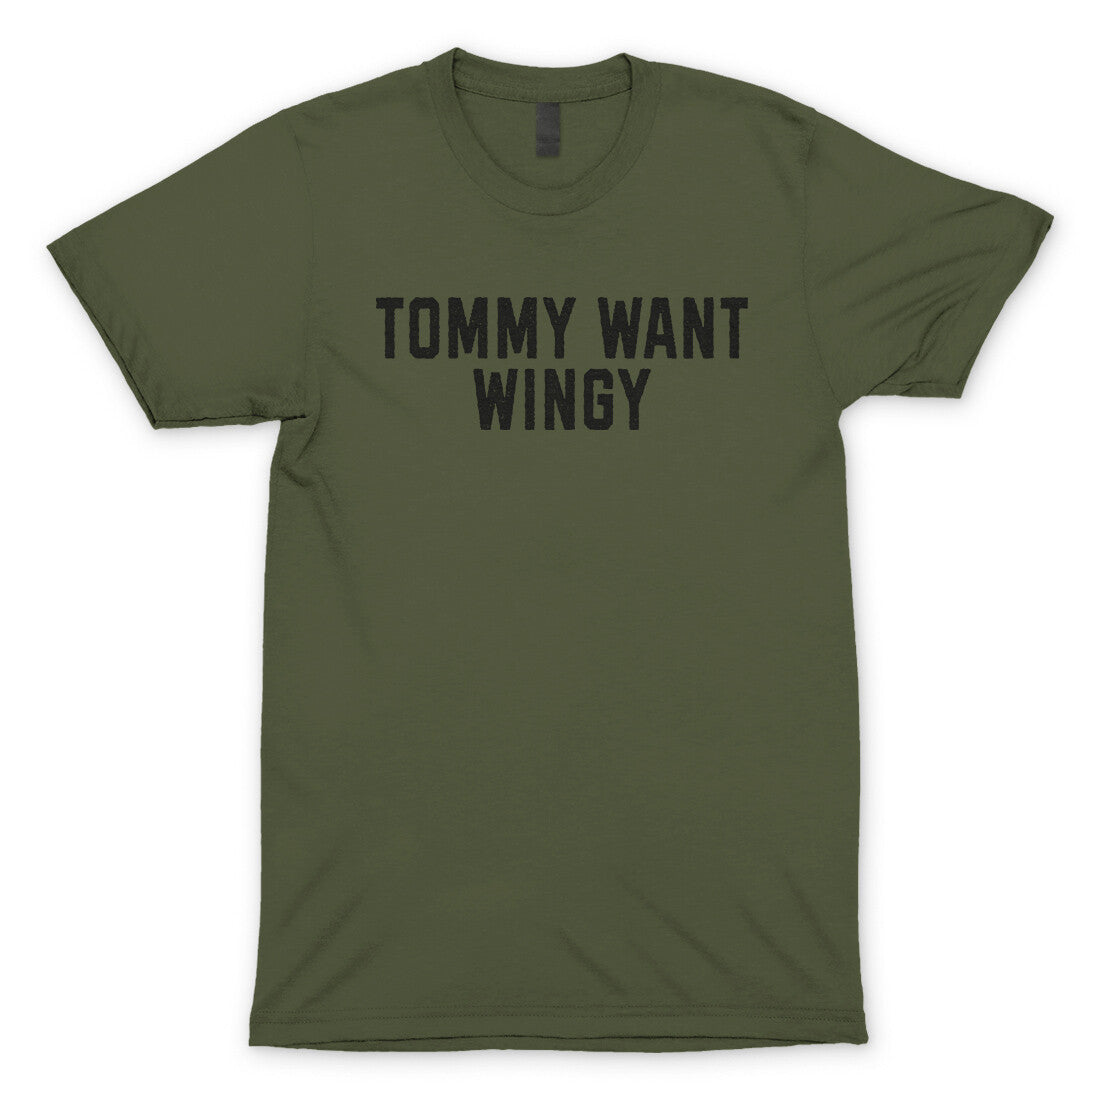 Tommy Want Wingy in Military Green Color